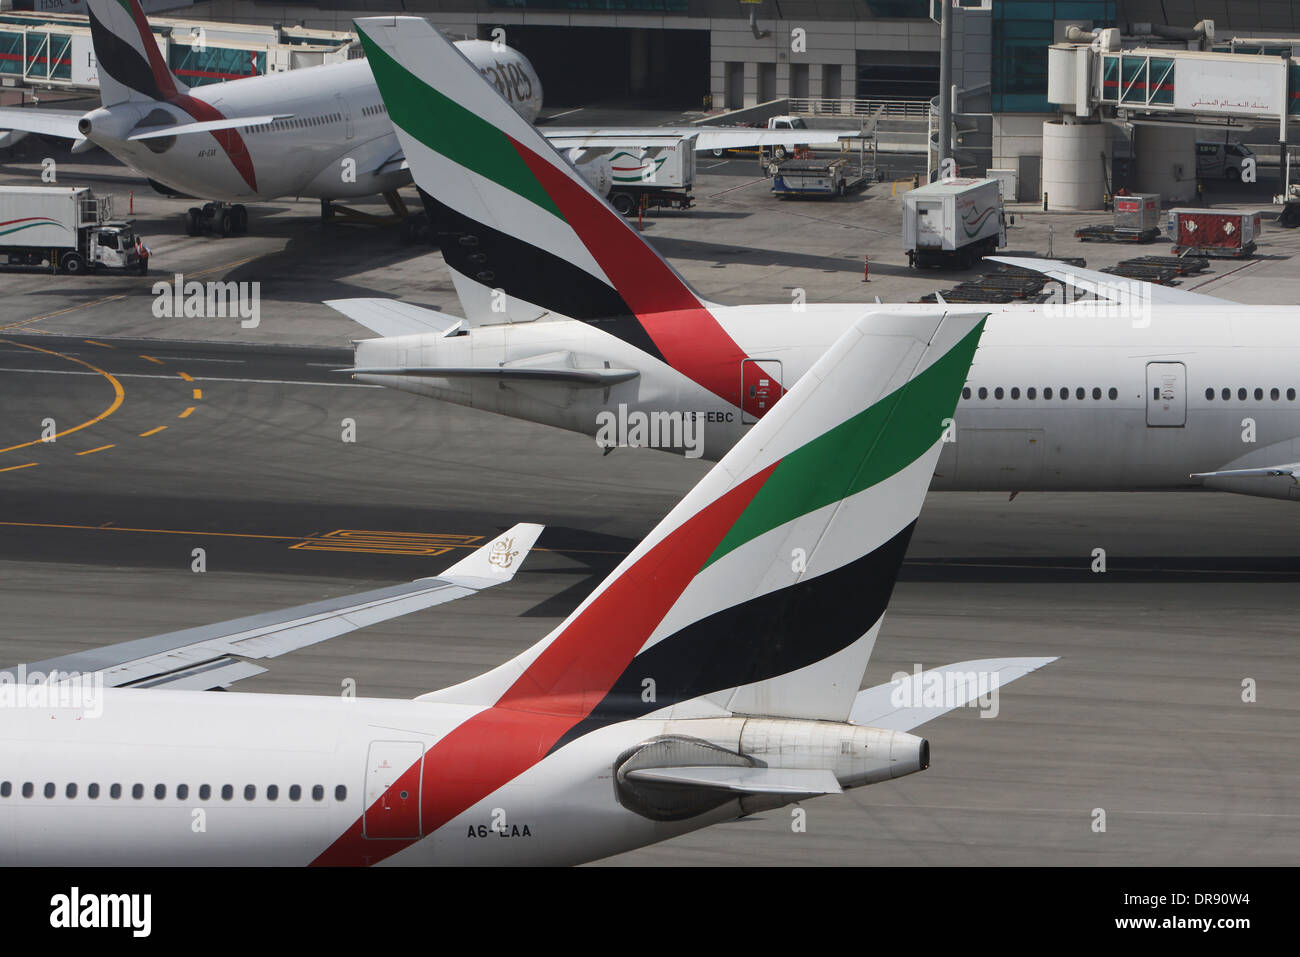 Emirates Airlines at their home airport, Dubai Stock Photo